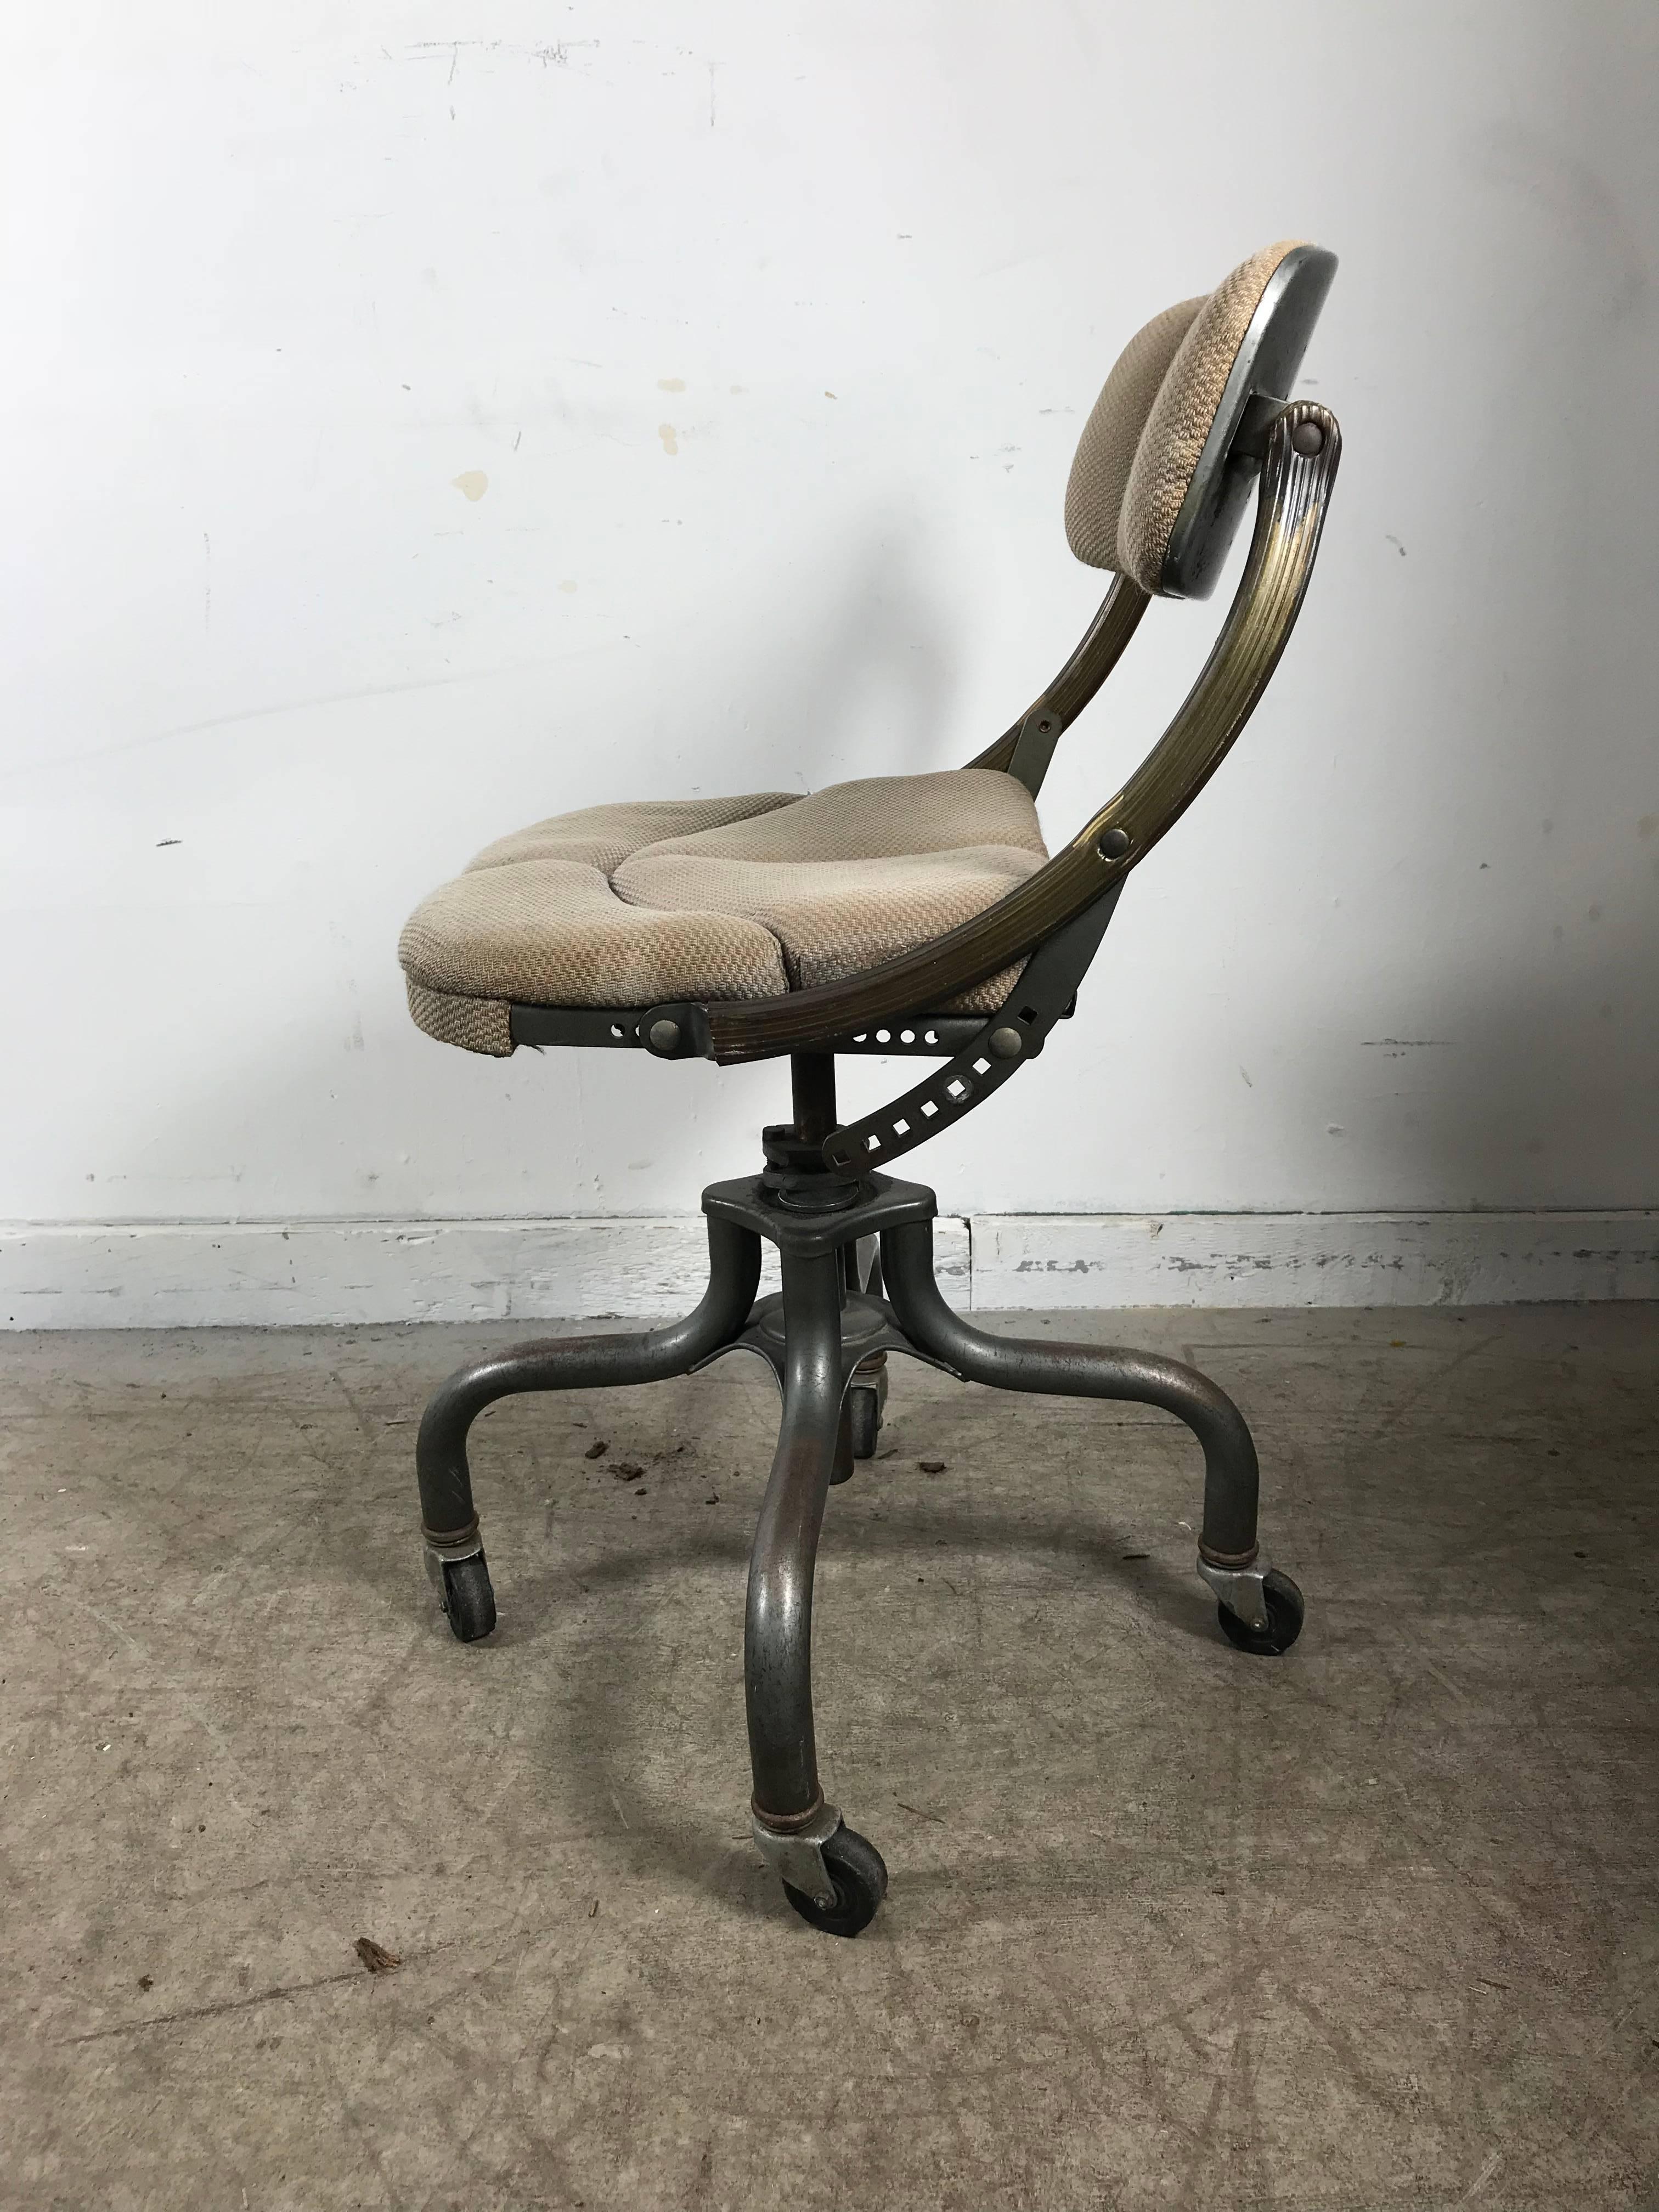 Early Industrial adjustable rolling desk chair by DoMore, nice example, retains original fabric, extremely comfortable as well as smart, simple, stylish design.